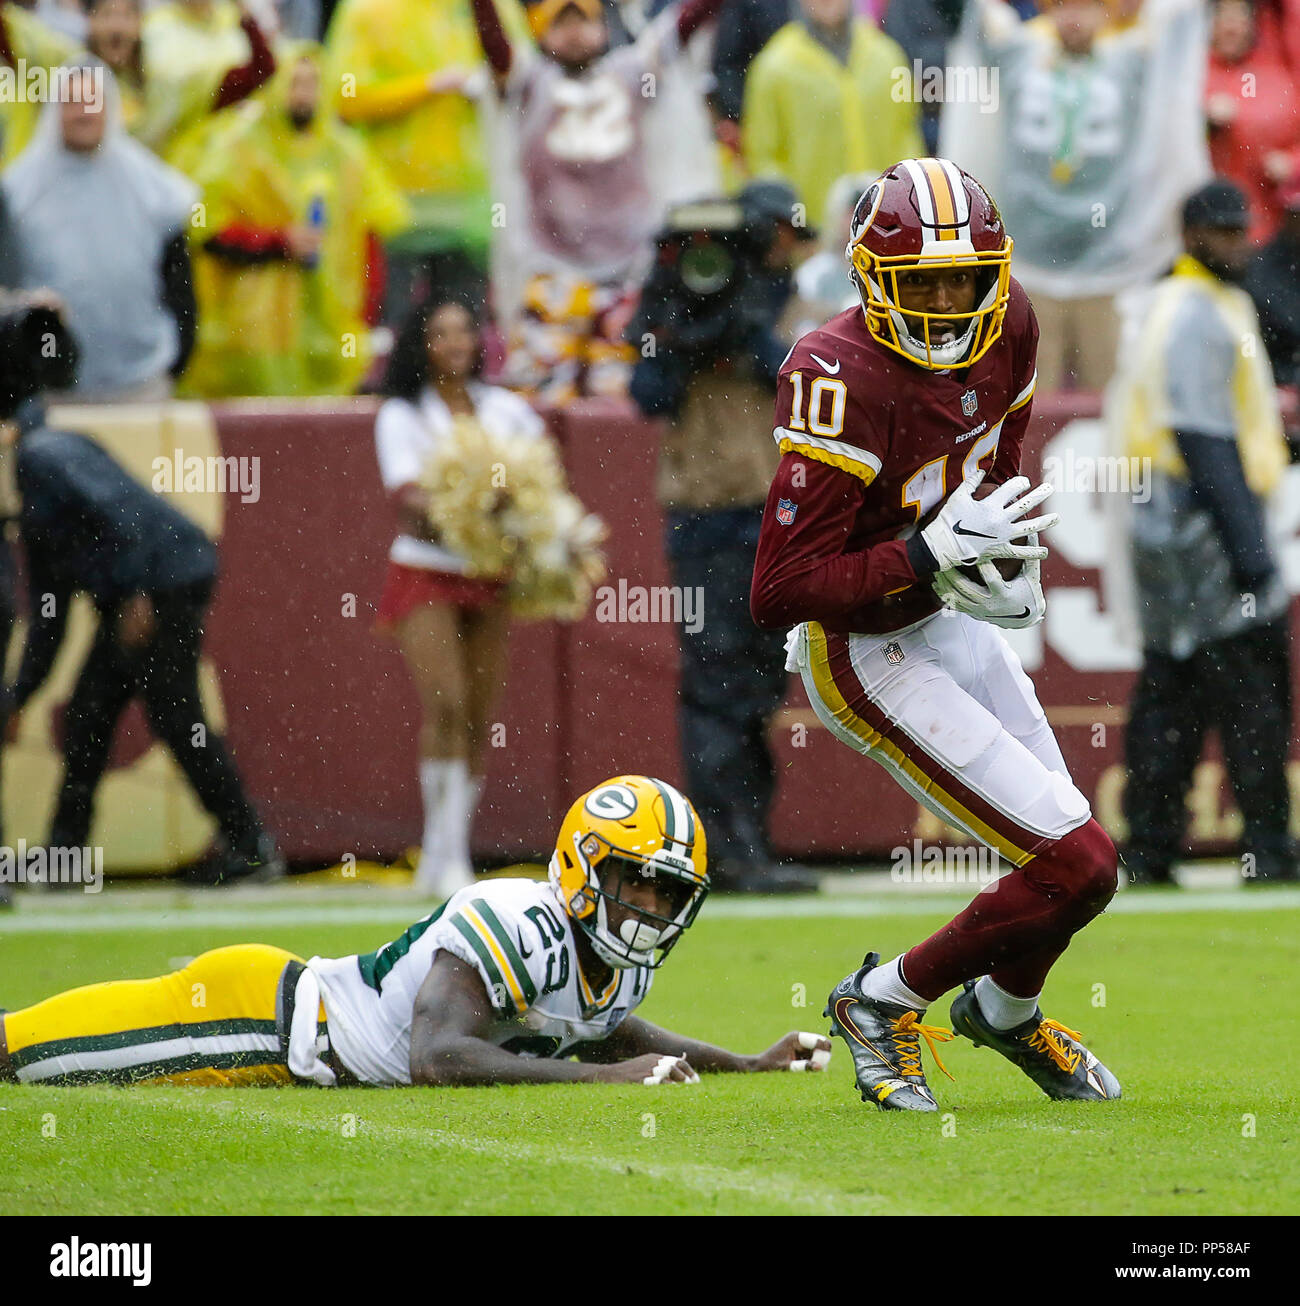 Maryland, USA. September 23, 2018: Washington Redskins WR #10 Paul  Richardson catches a deep pass for a touchdown during a NFL football game  between the Washington Redskins and the Green Bay Packers